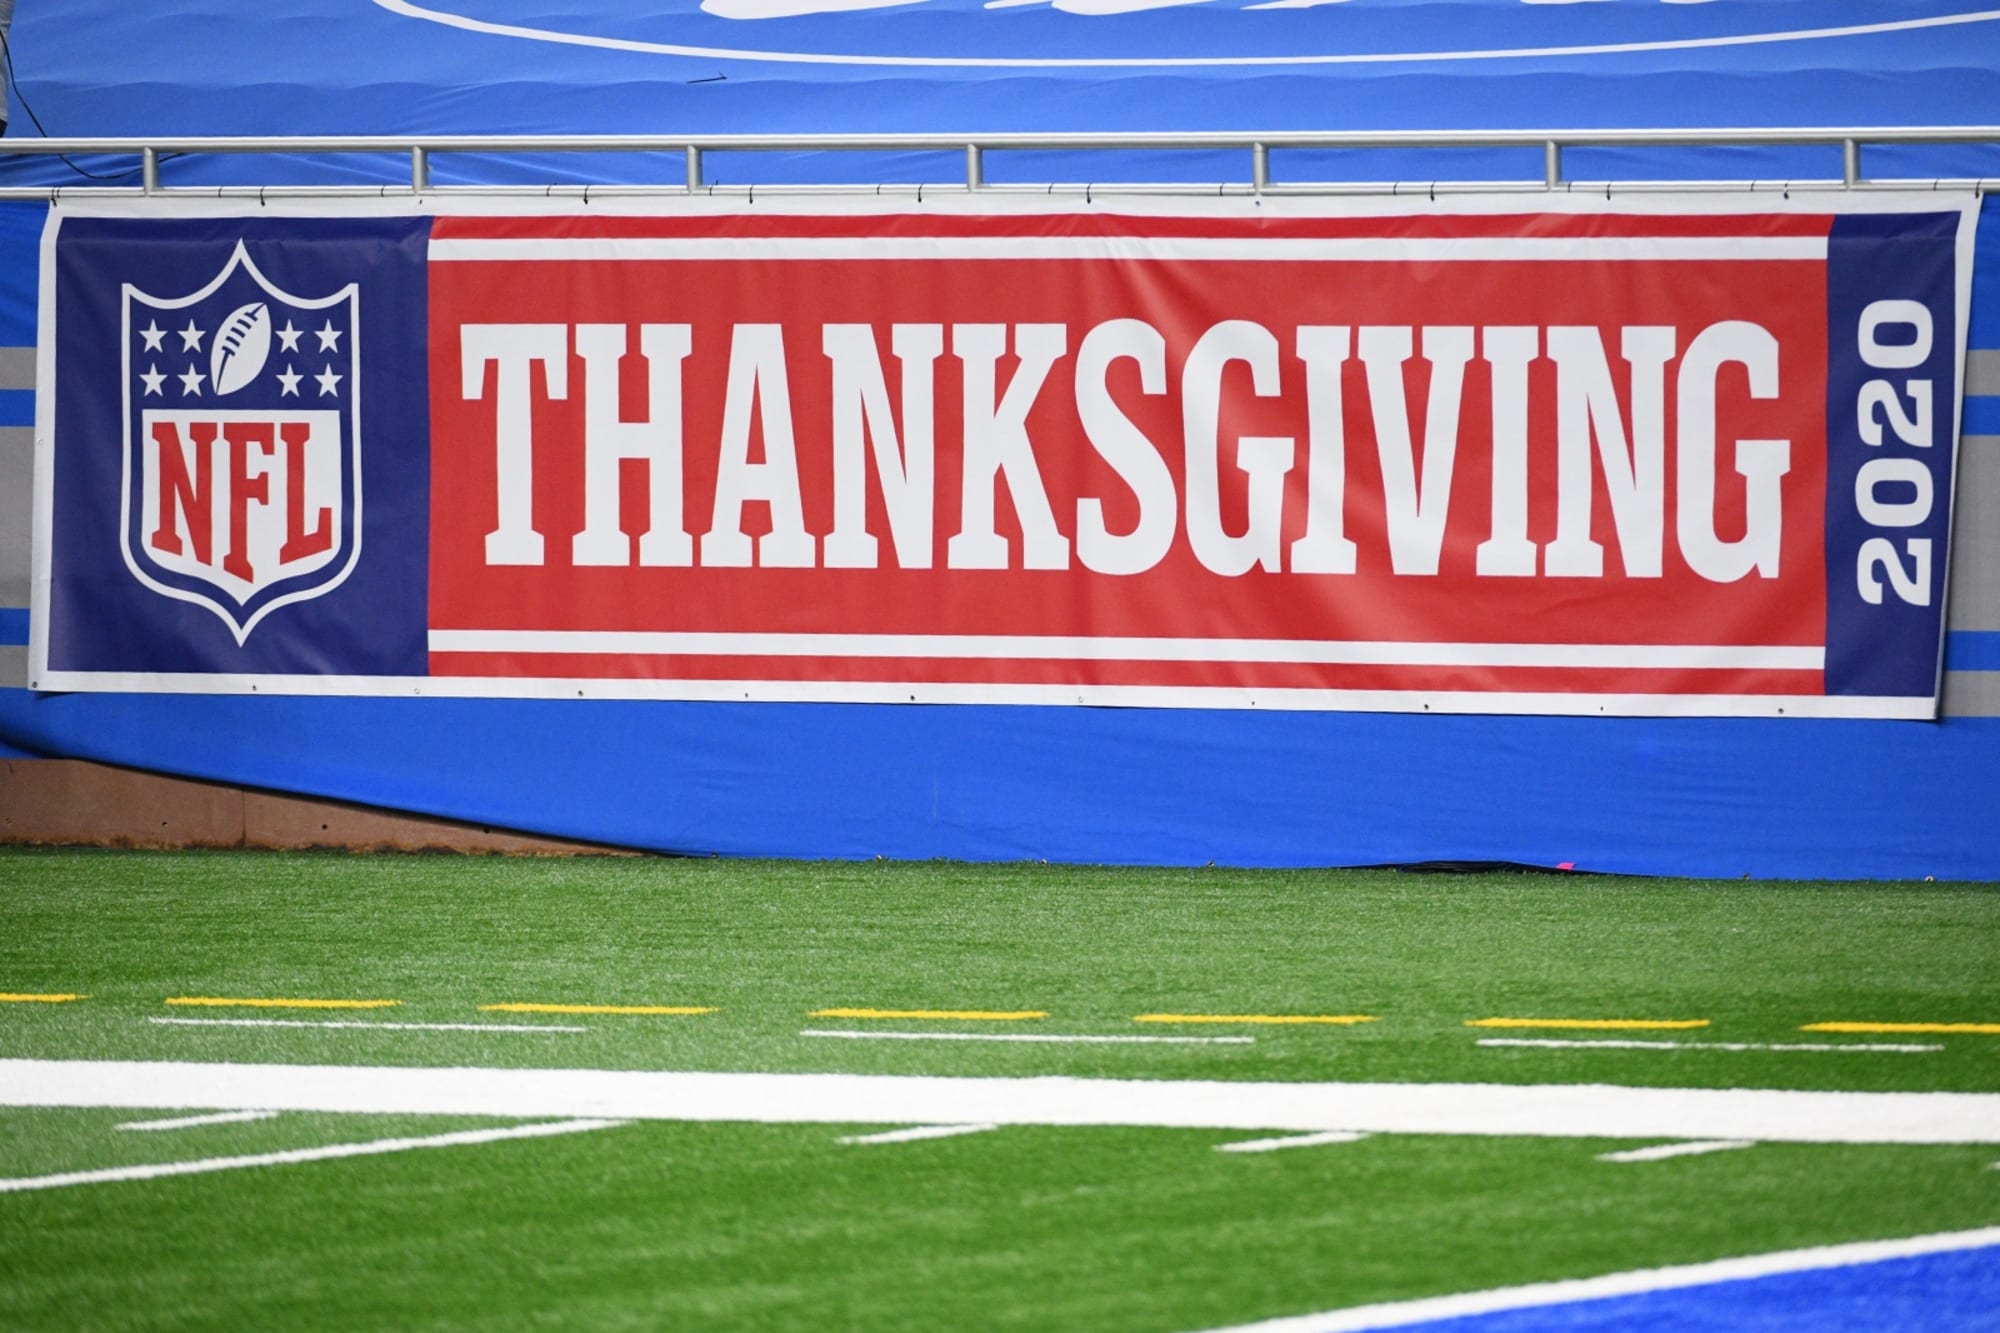 The Detroit Lions play on Thanksgiving every year for a reason